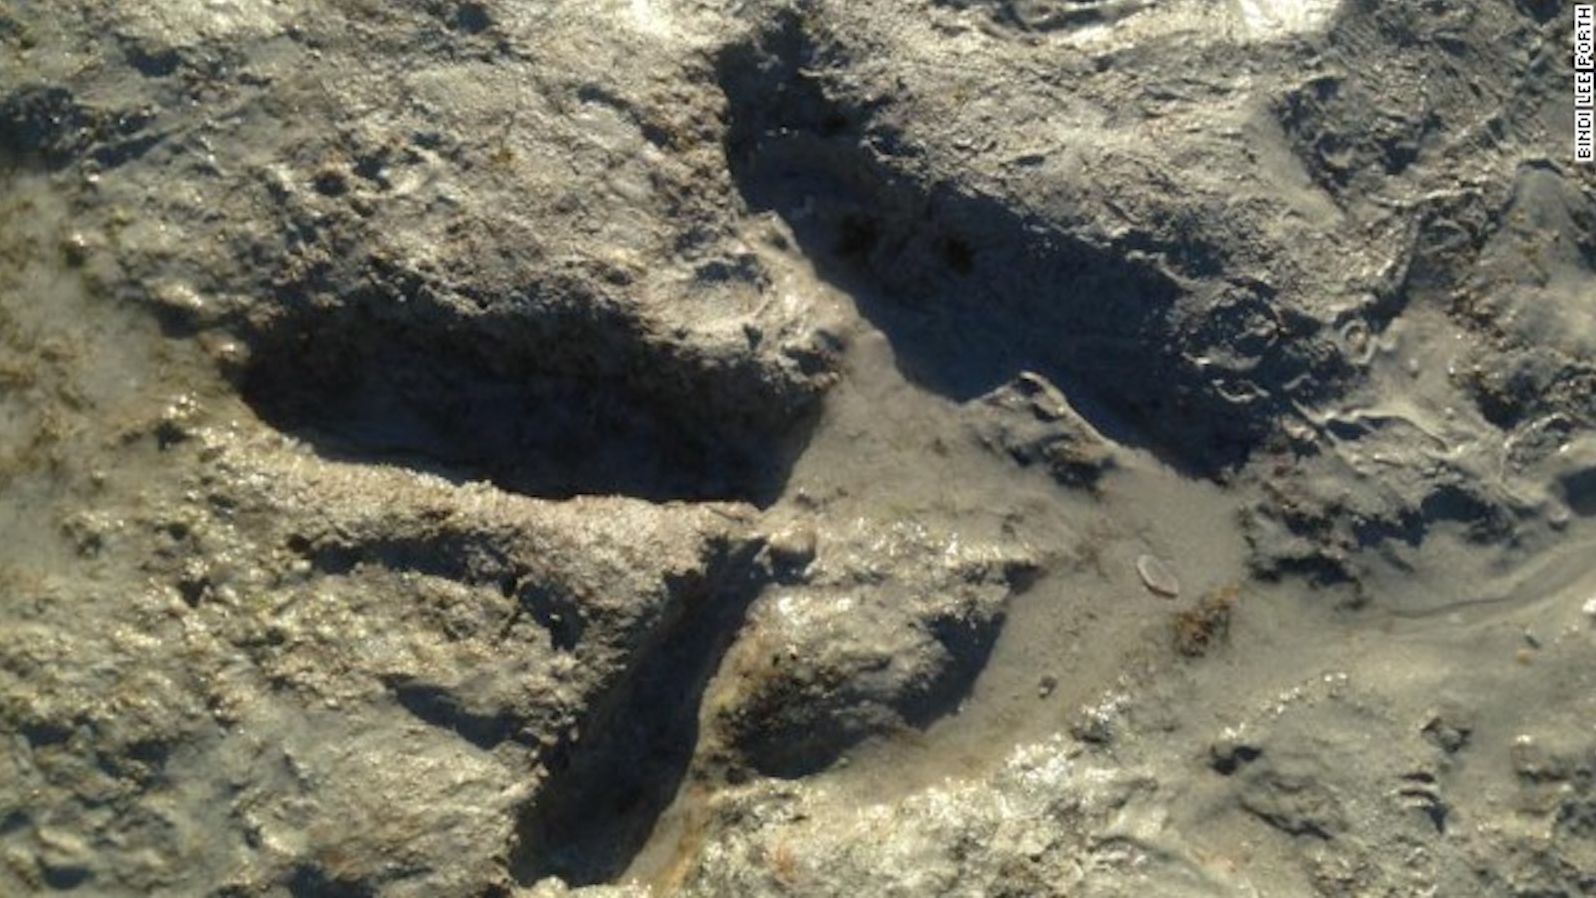 One of a number of footprints found along the beach.